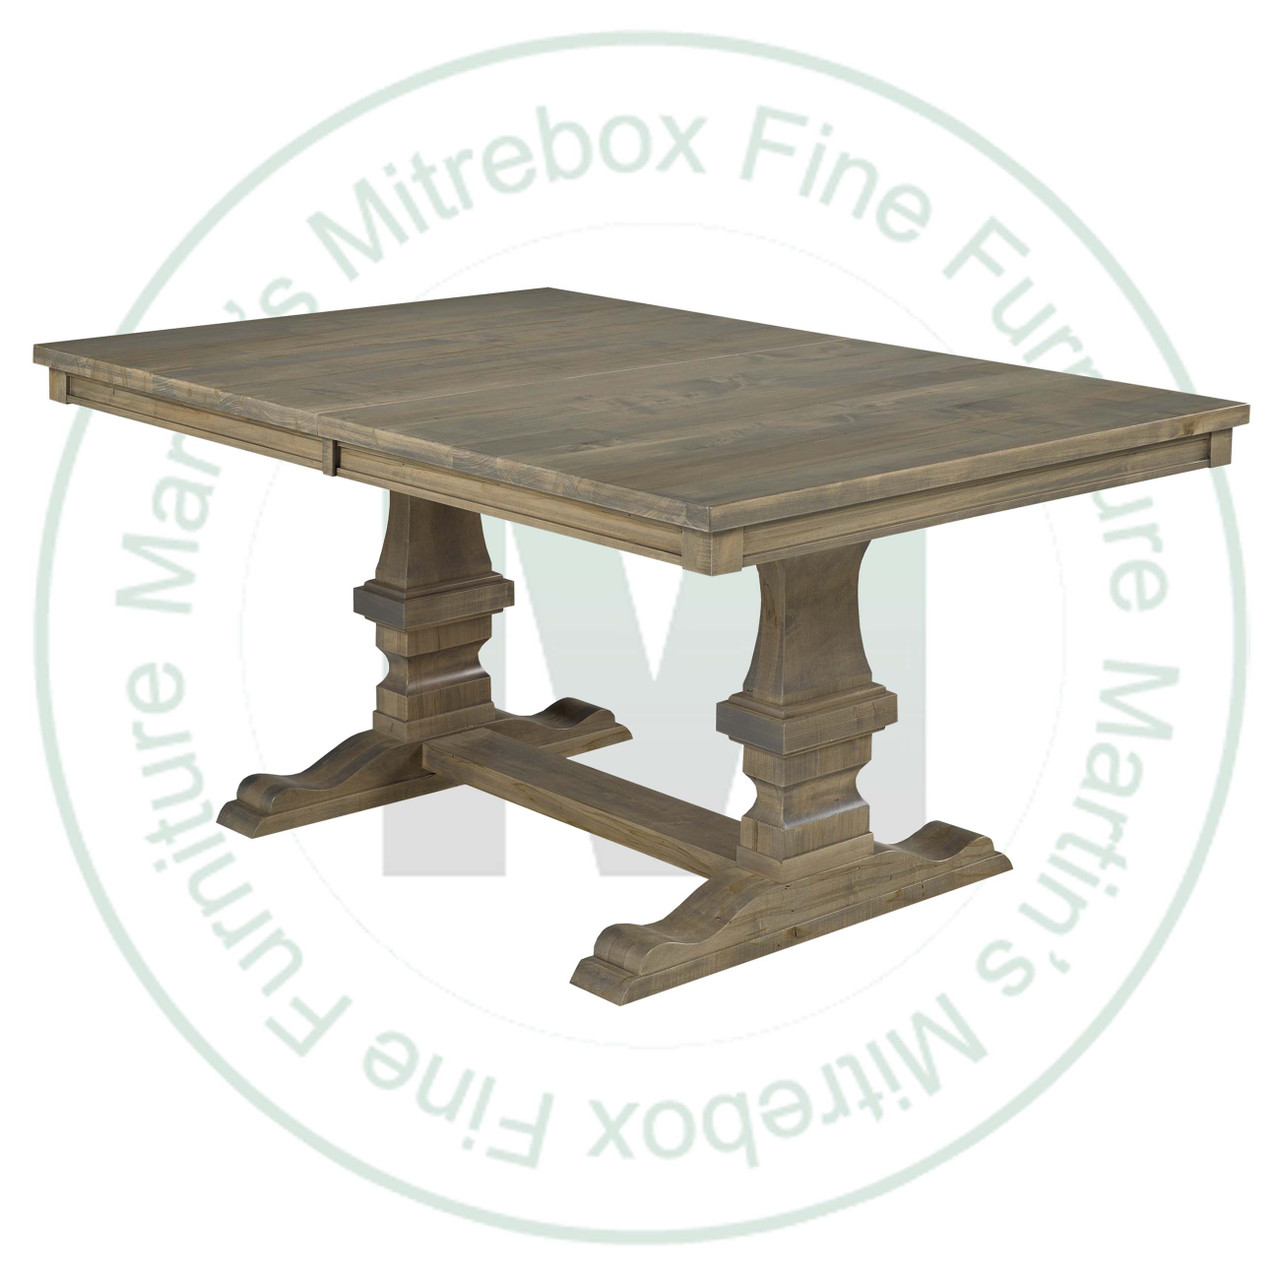 Oak Persian Double Pedestal Table 48''D x 60''W x 30''H With 3 - 12'' Leaves Table Has 1.25'' Thick Top